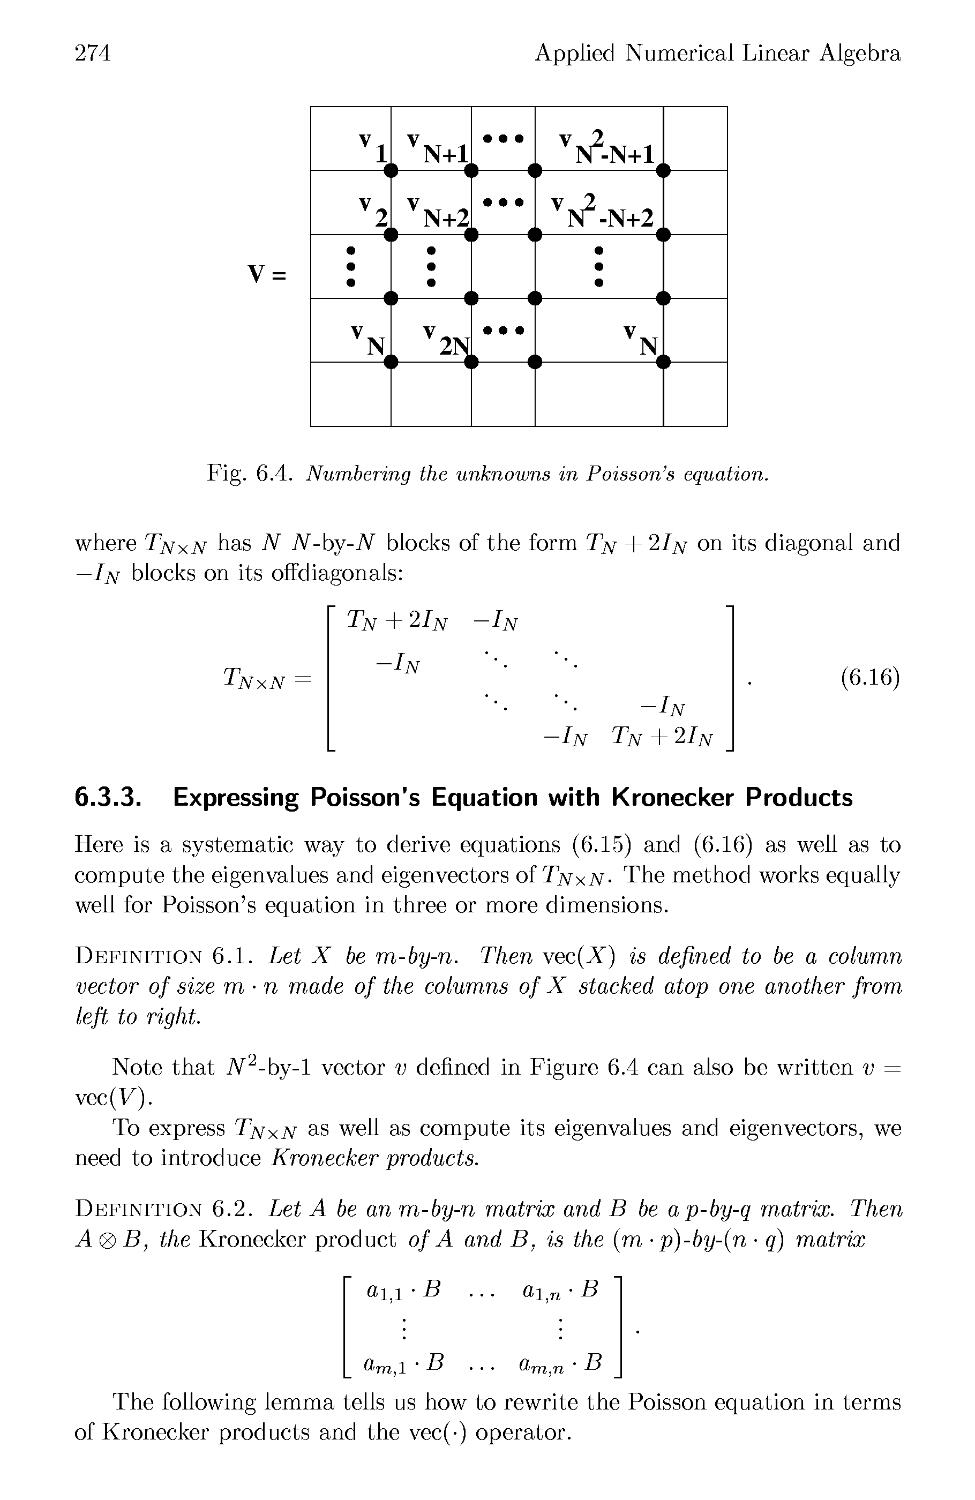 6.3.3 Expressing Poisson's Equation with Kronecker Products